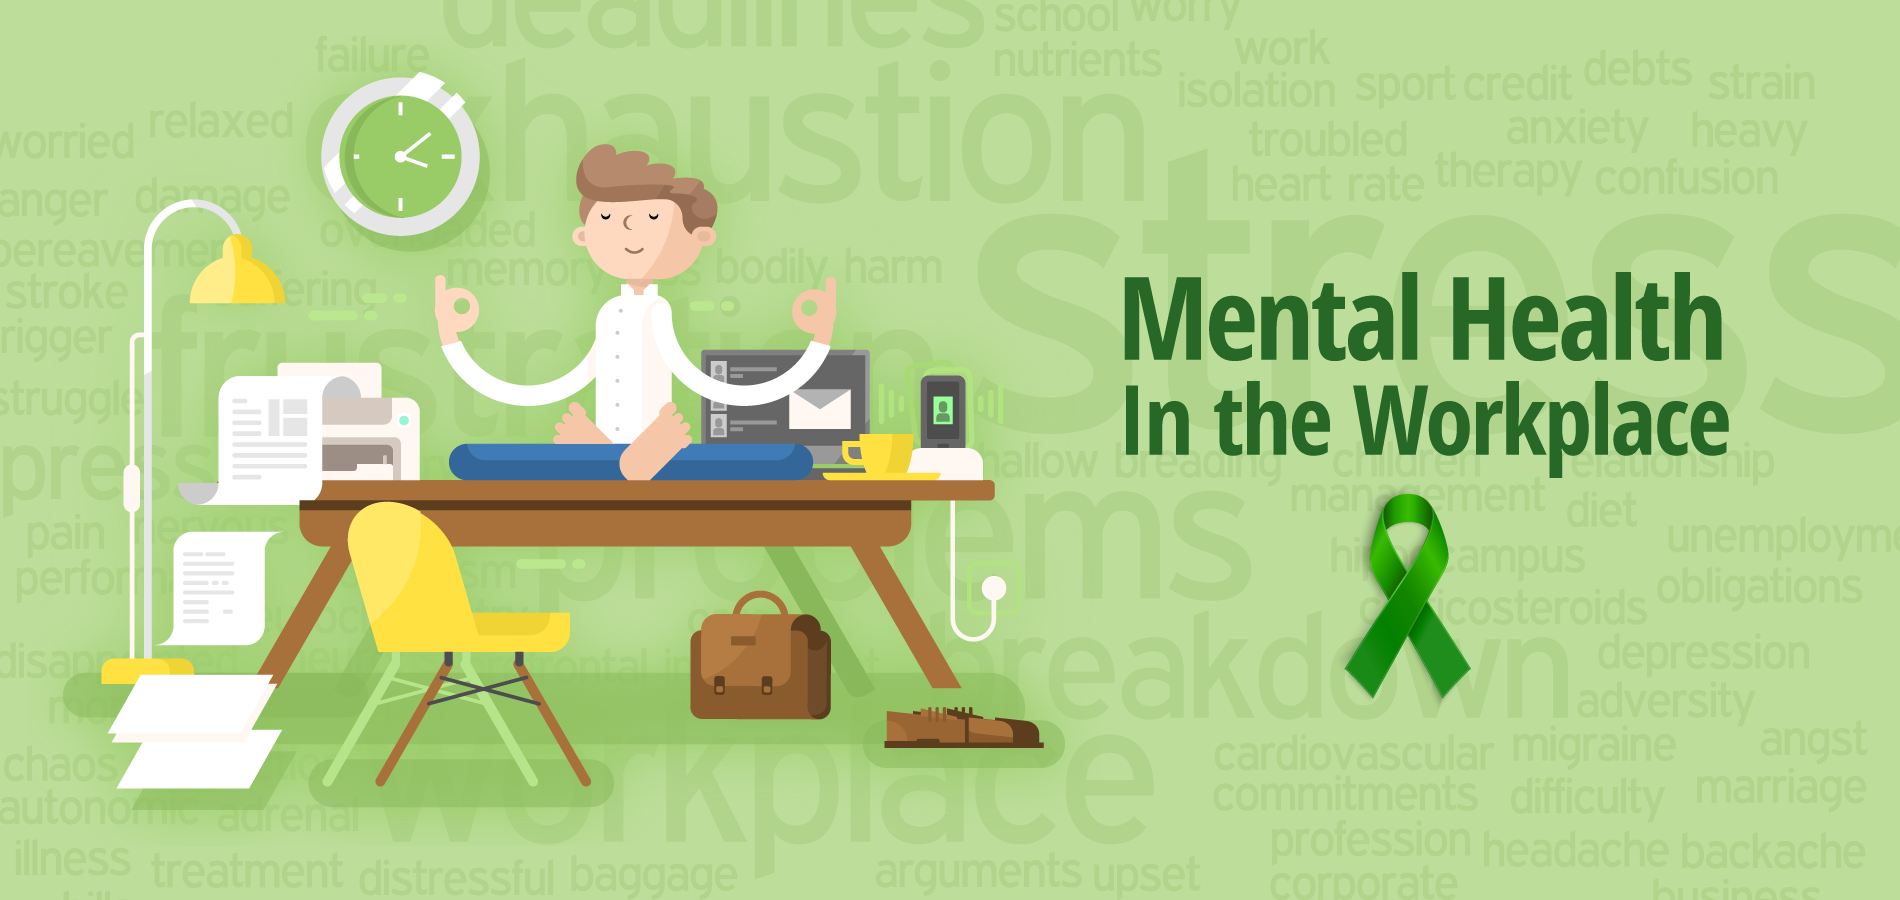 The realities of mental health in the workplace